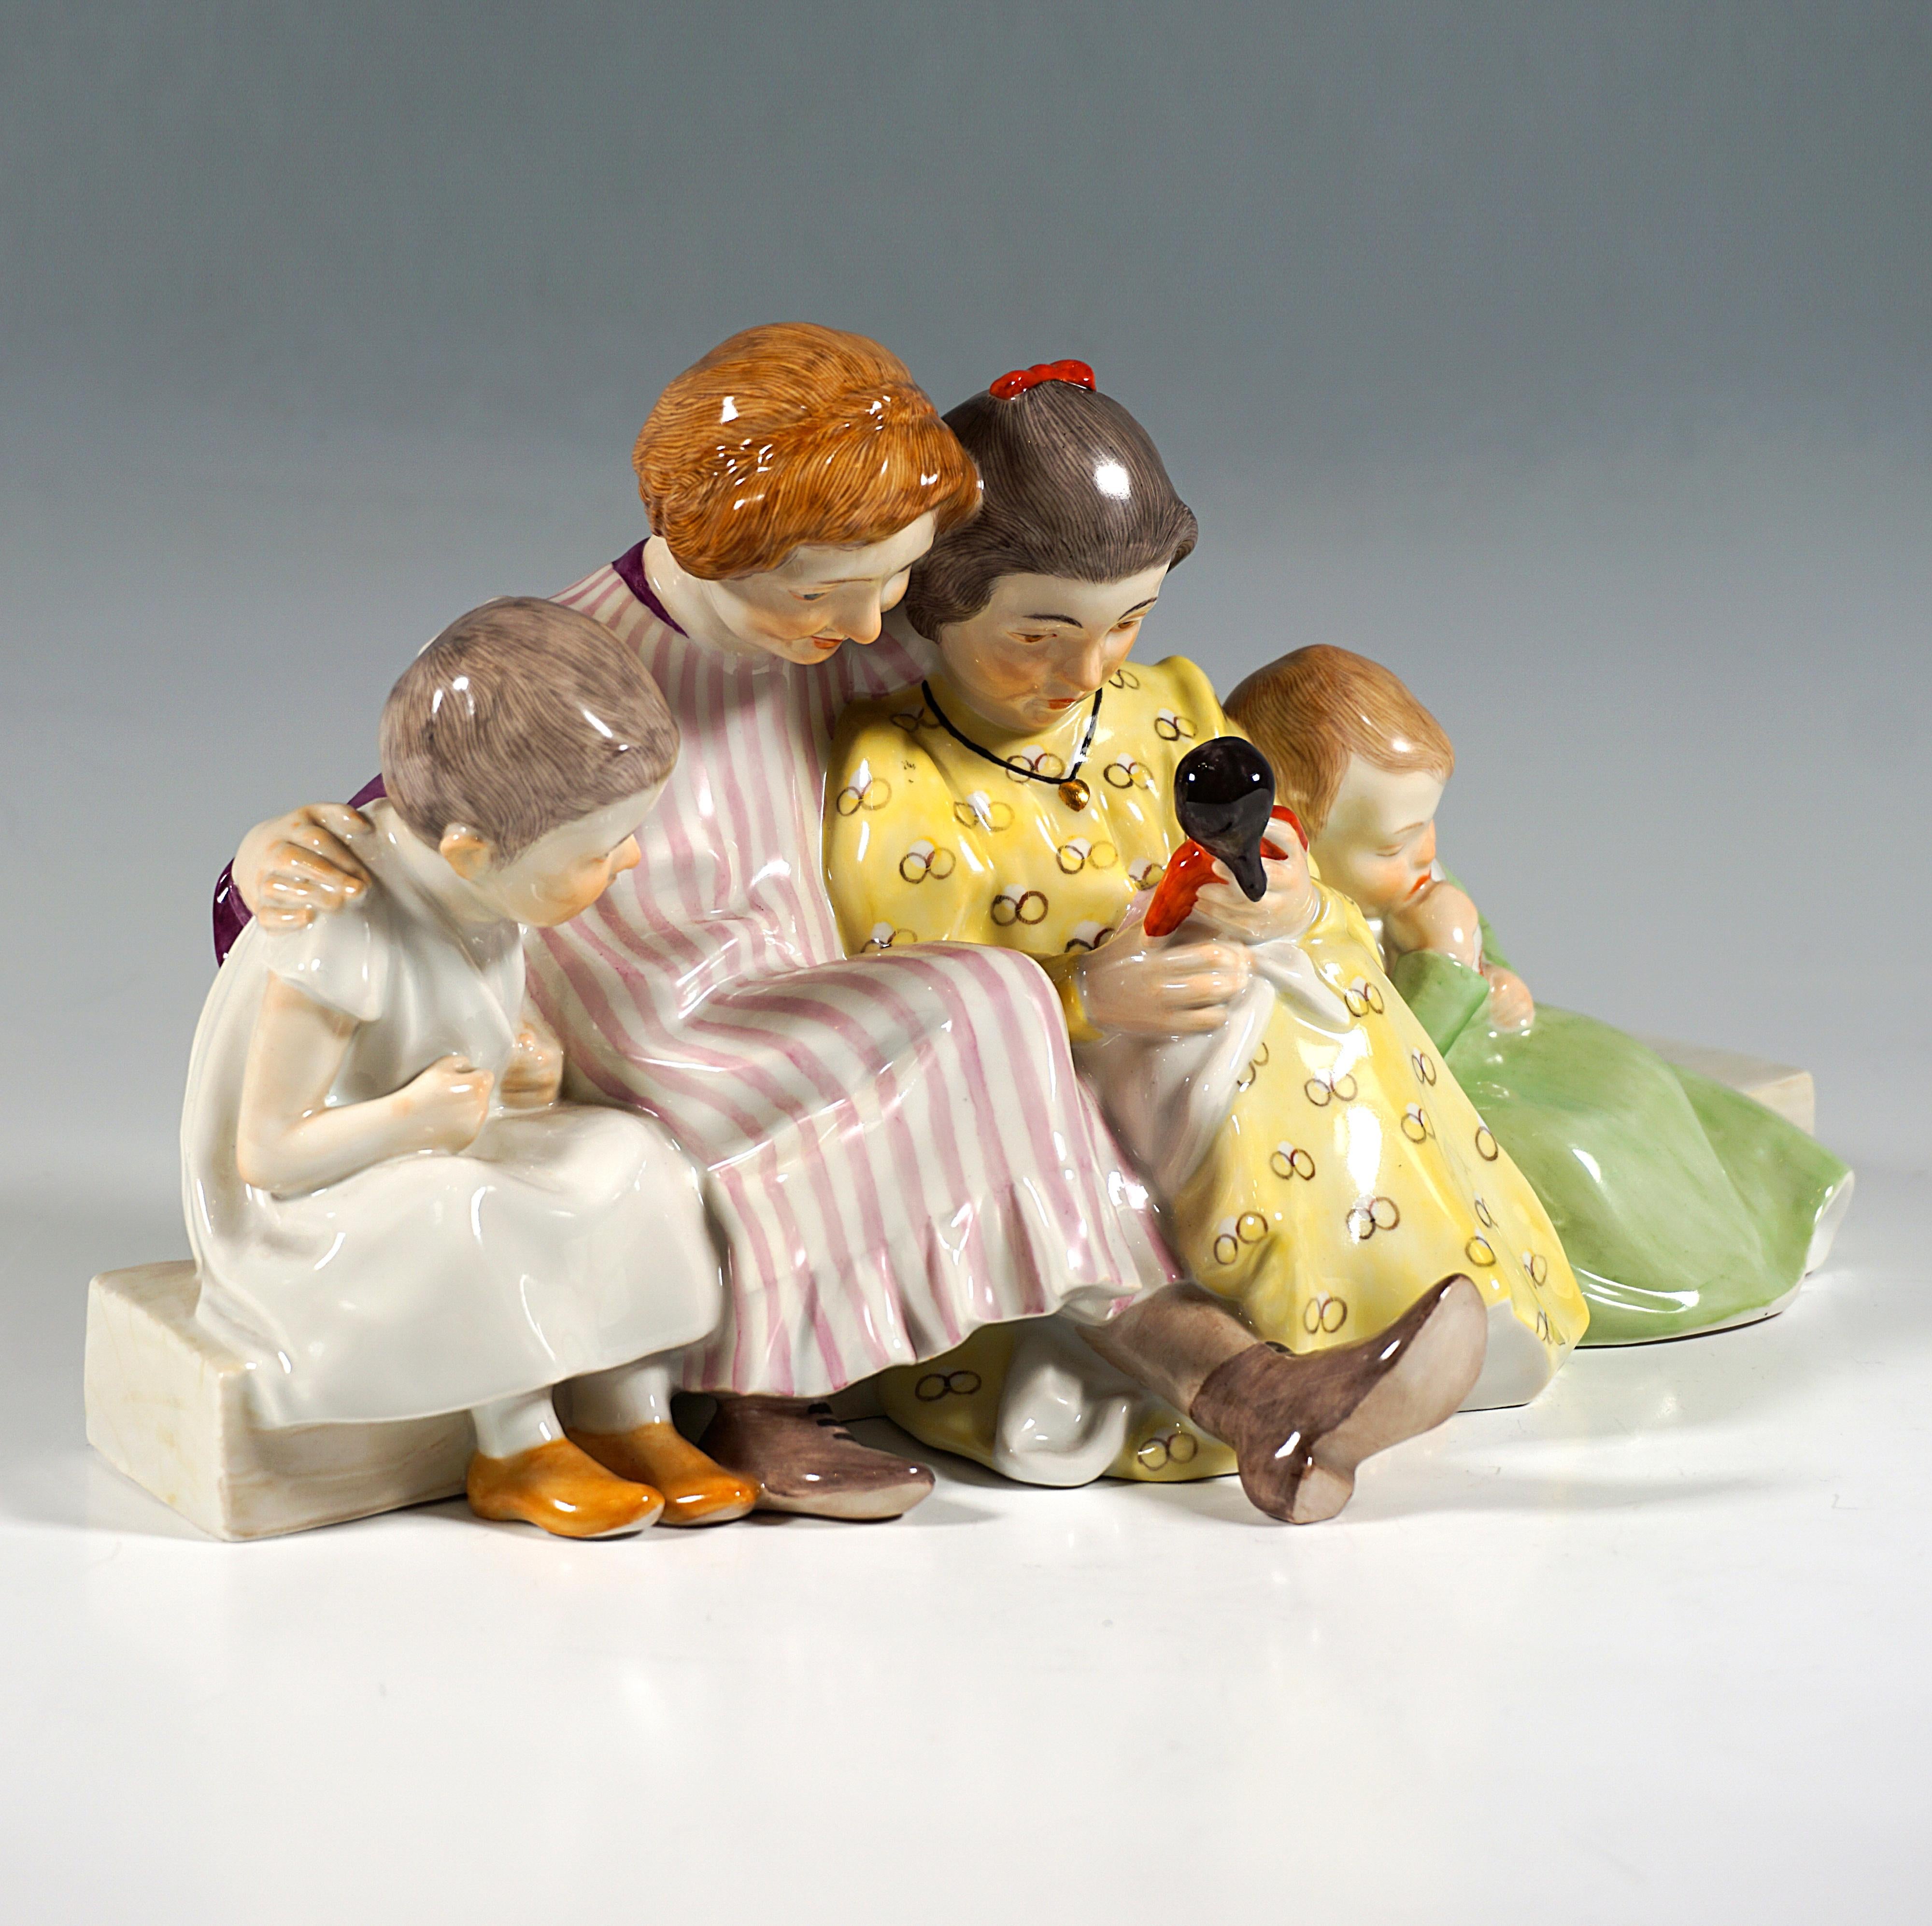 Finest Meissen porcelain figure group:
Two girls in patterned dresses with their hair tied up, flanked by two small children in long shirts, sitting on an elongated flat stone pedestal, one girl holding a doll on her lap, the two playmates on her